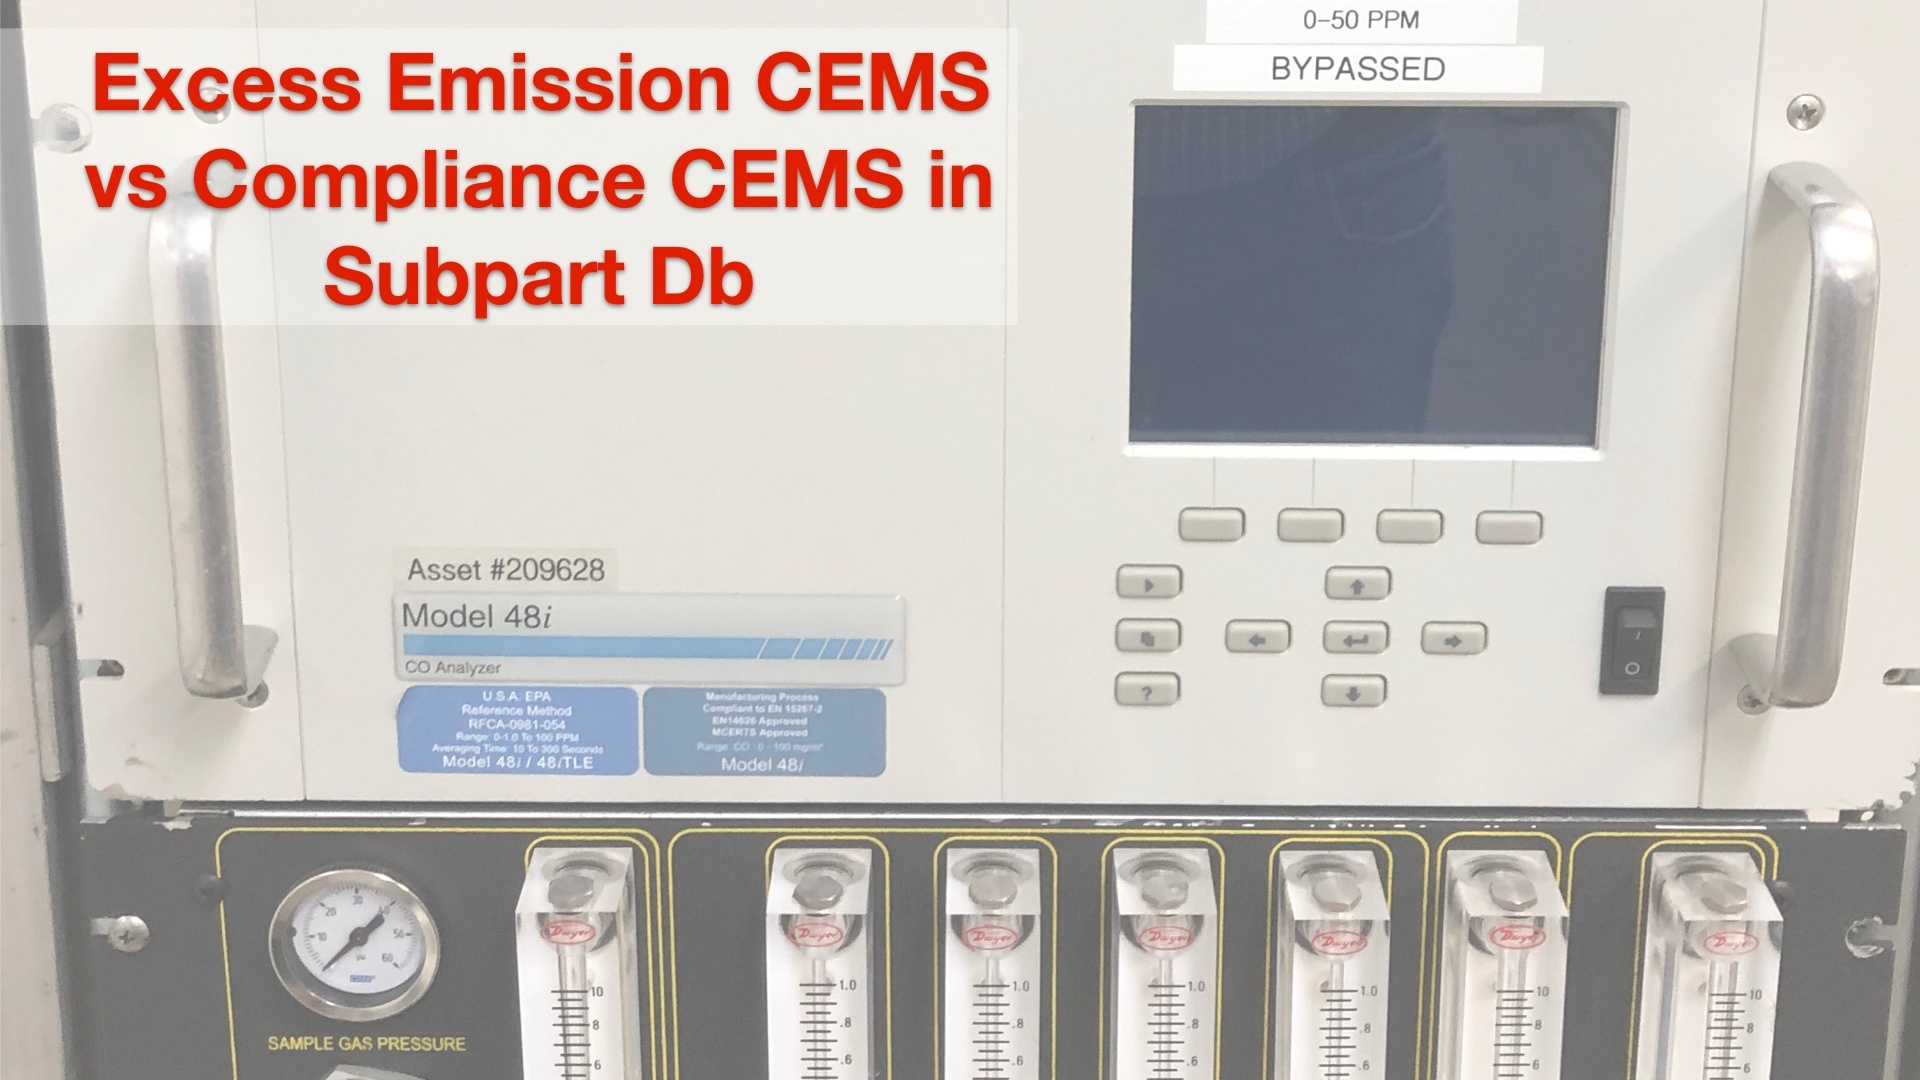 Excess Emission CEMS vs Compliance CEMS in Subpart Db